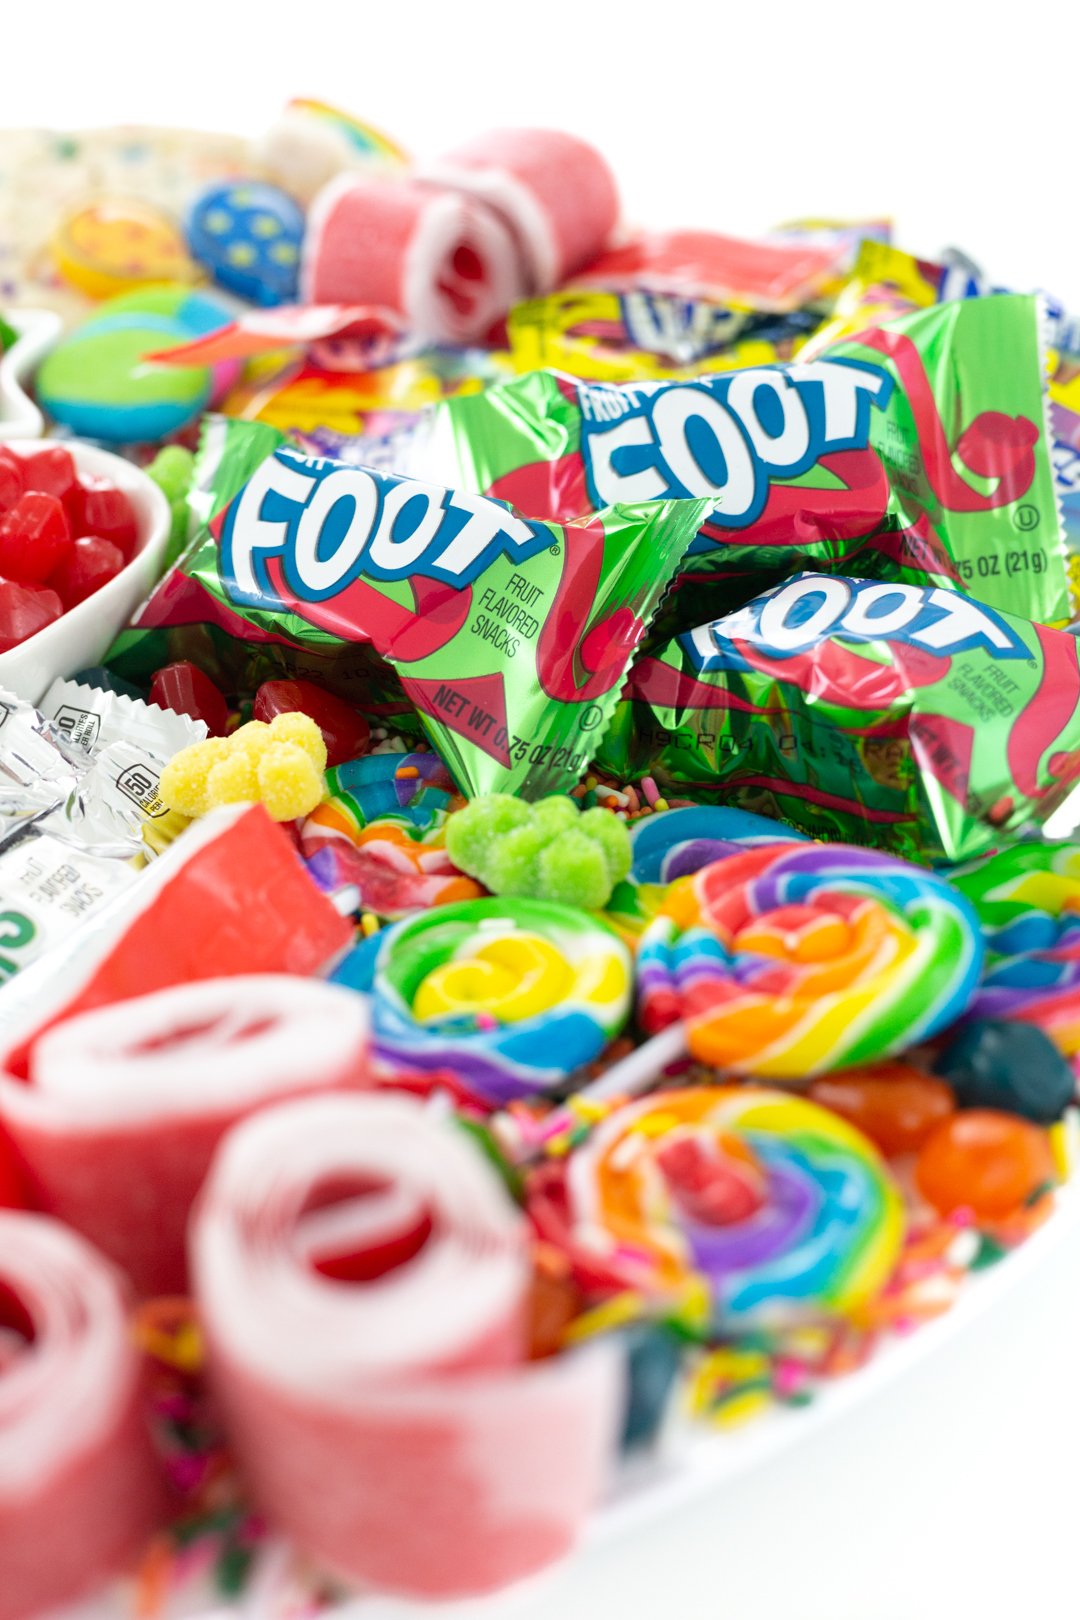 fruit by the foot and other fun candy